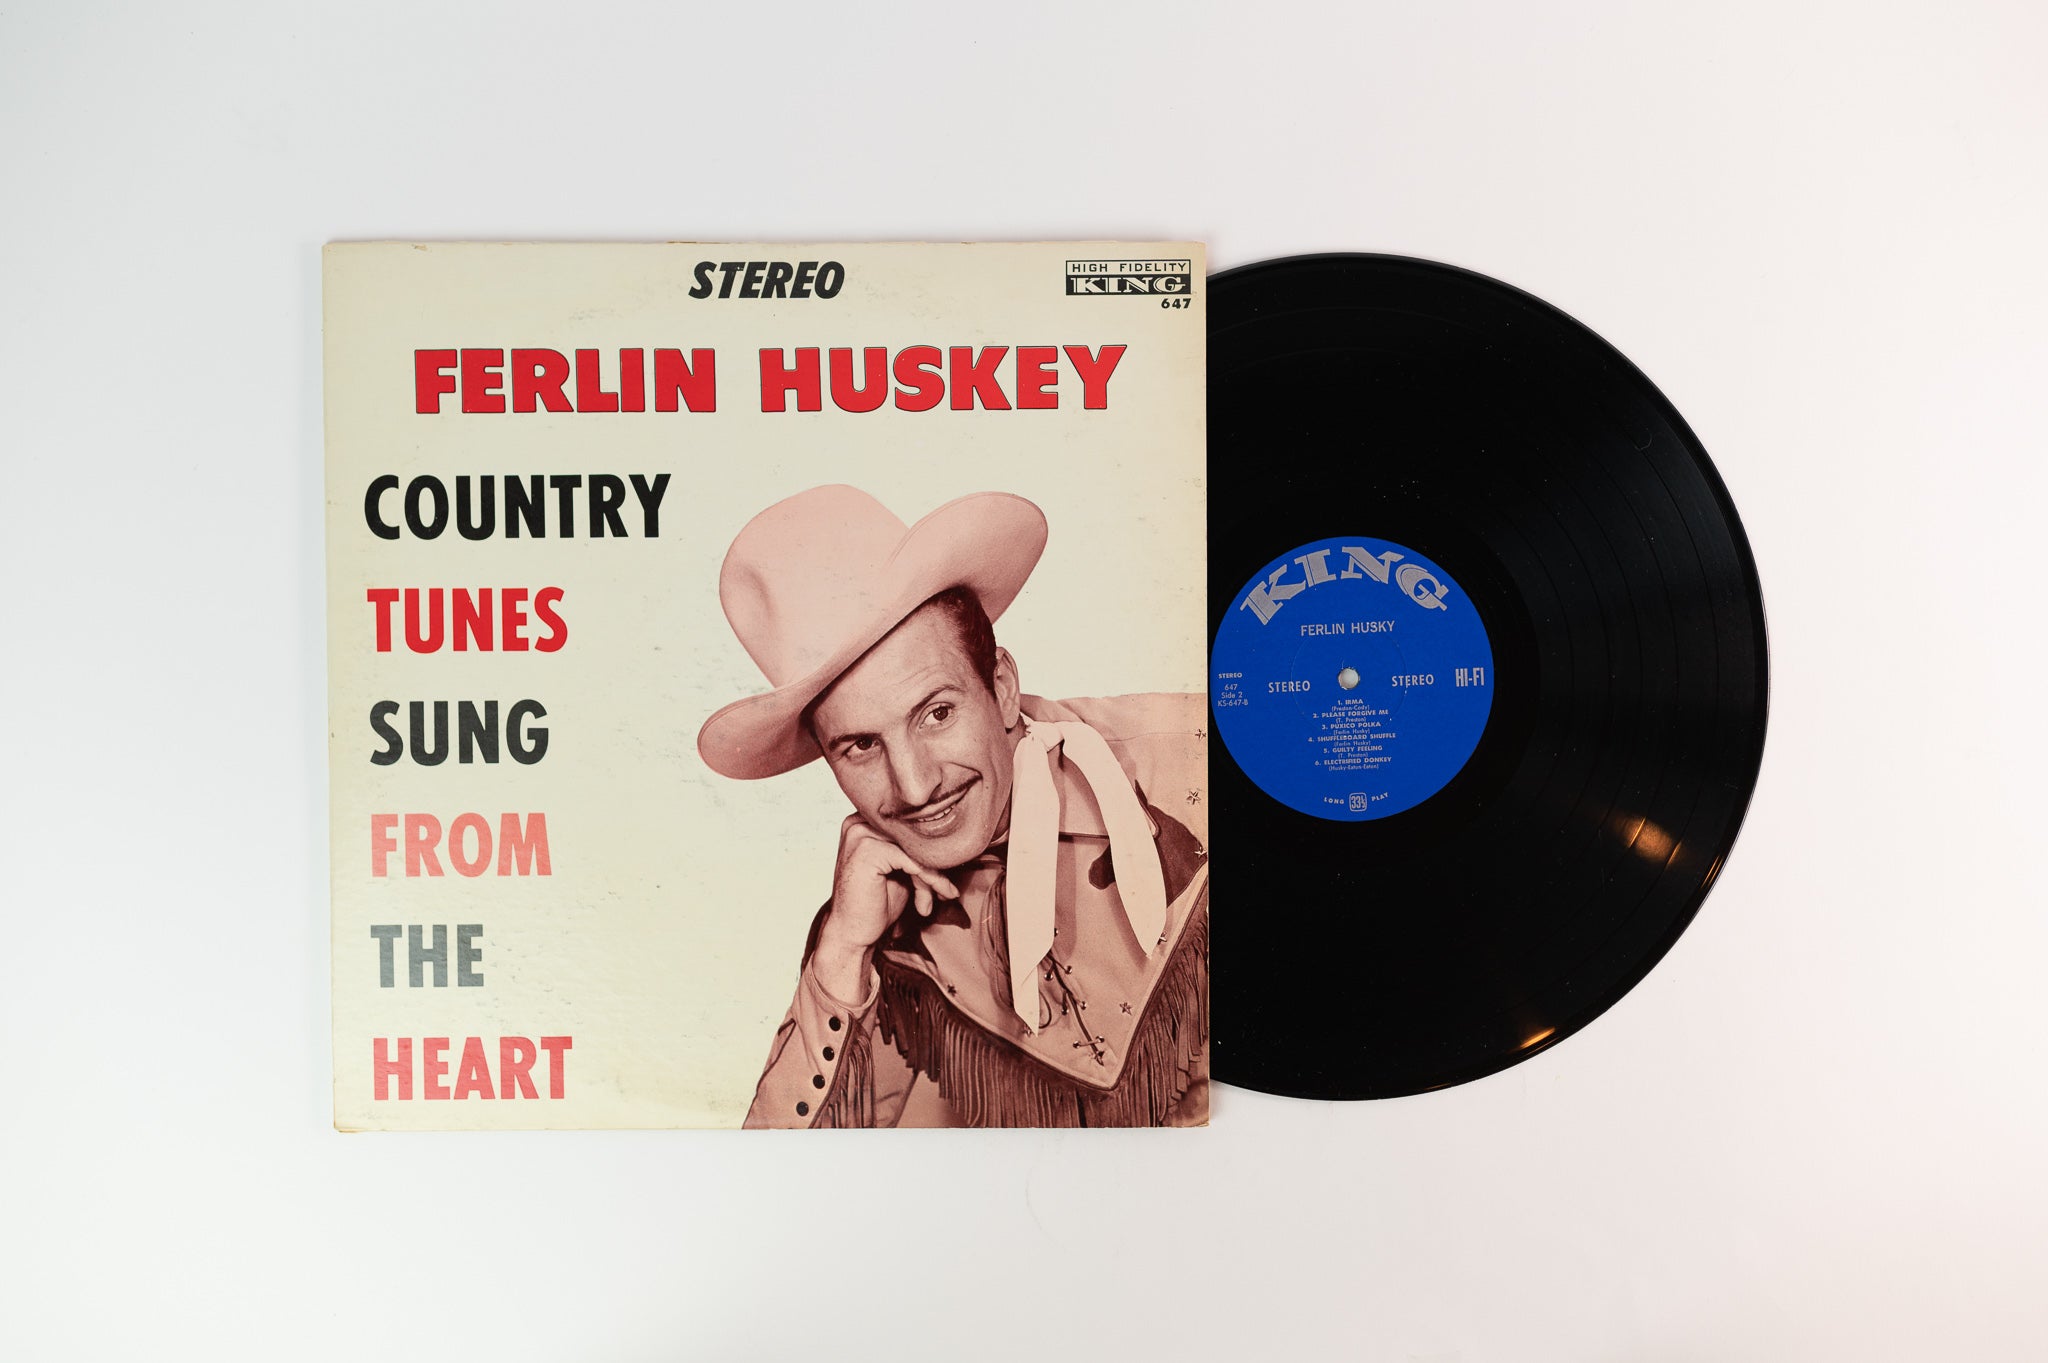 Ferlin Huskey  - Country Songs Sung From The Heart on King Stereo